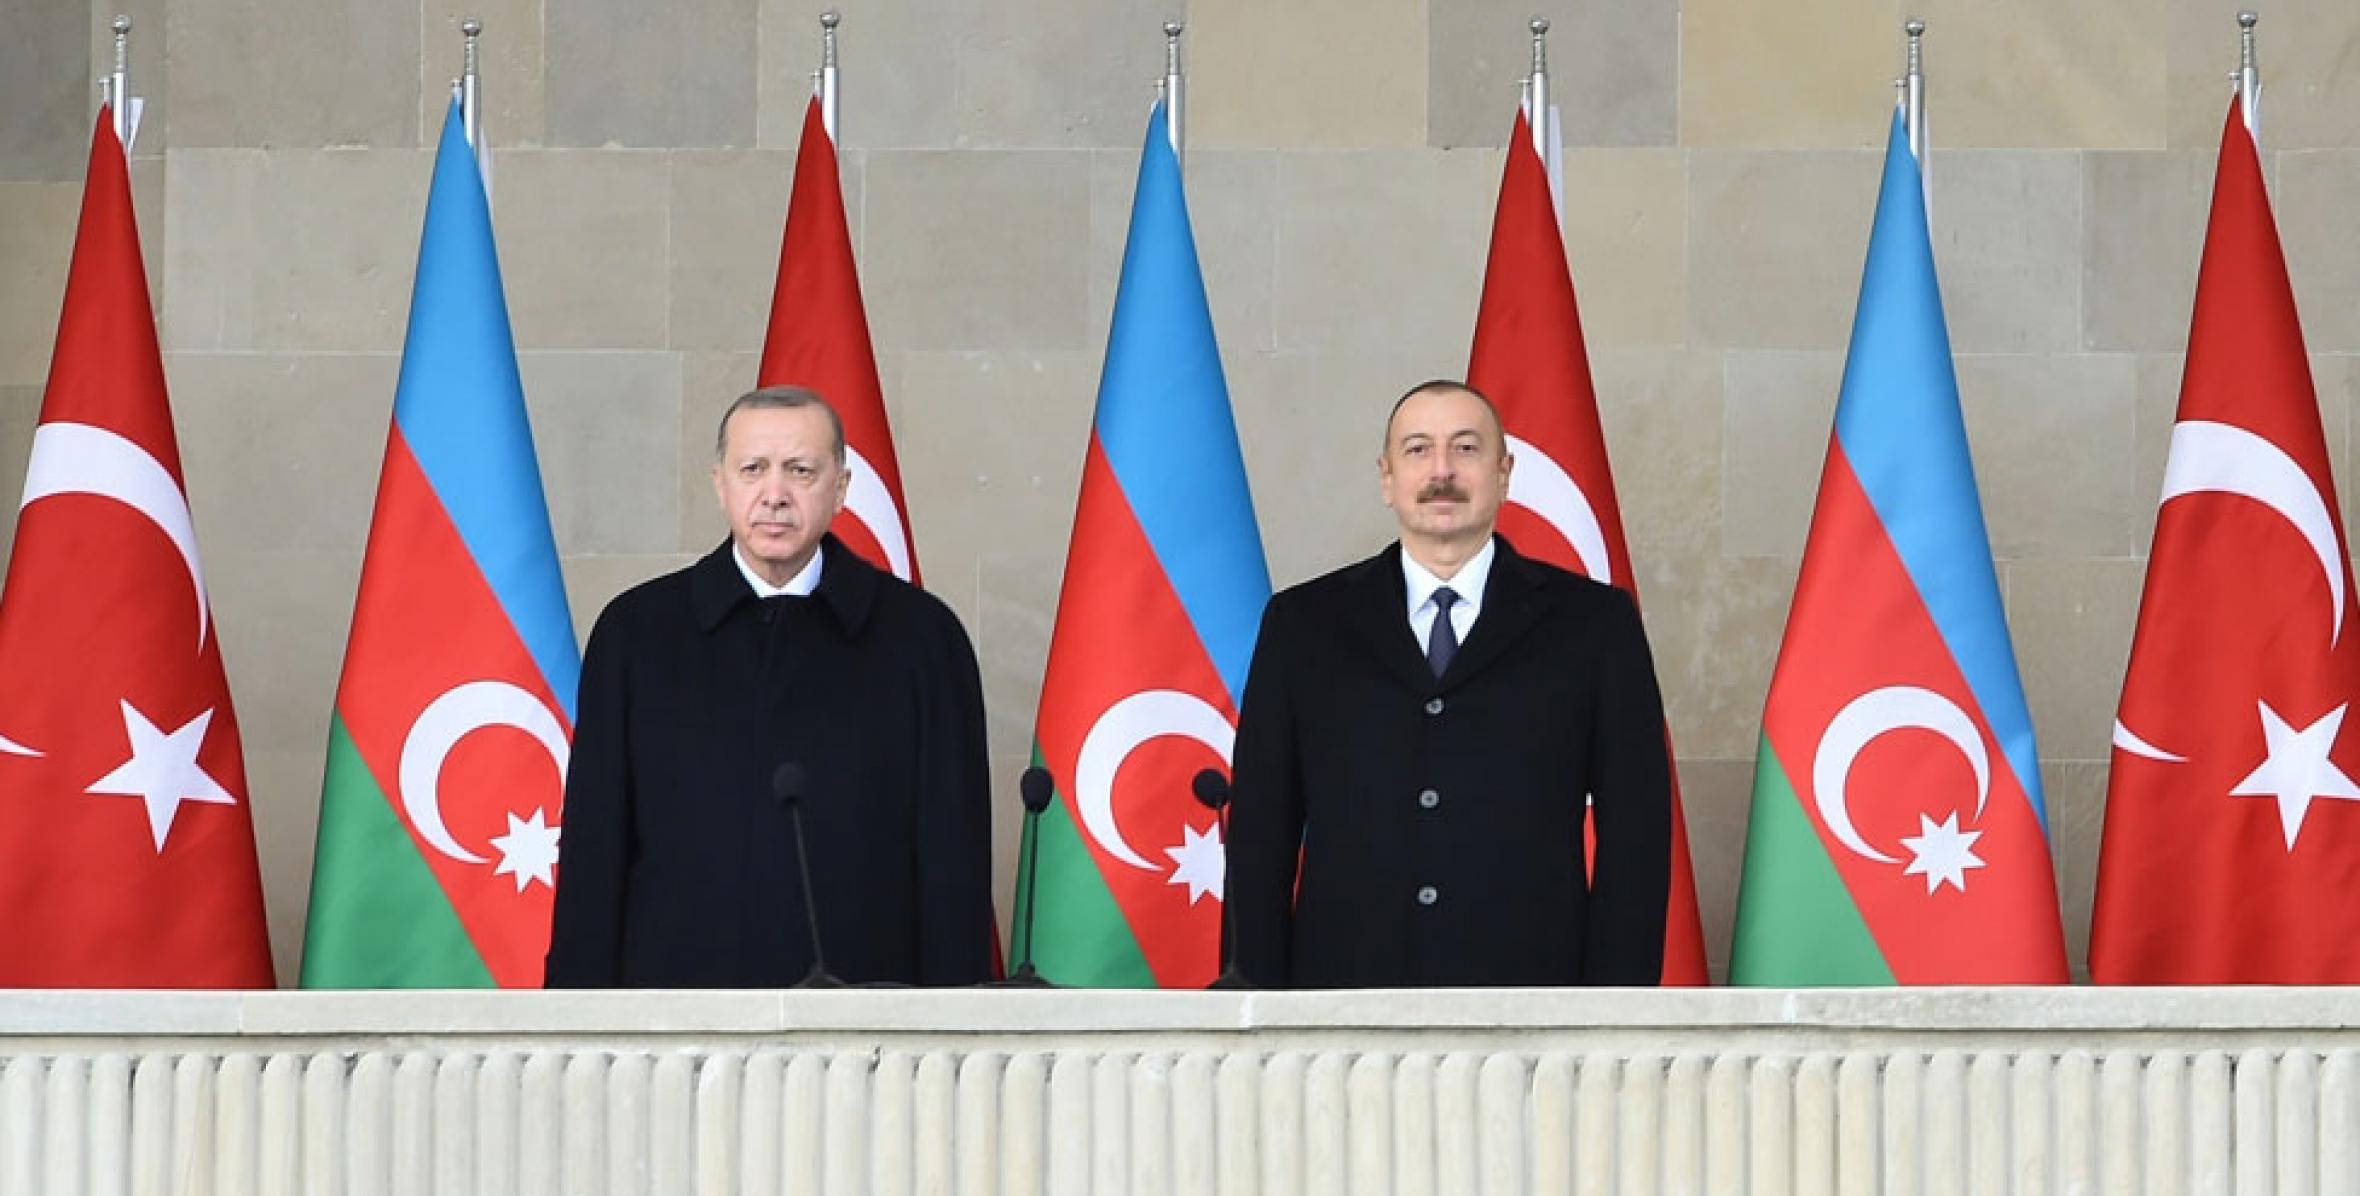 Speech by Ilham Aliyev at the Victory parade dedicated to Victory in the Patriotic